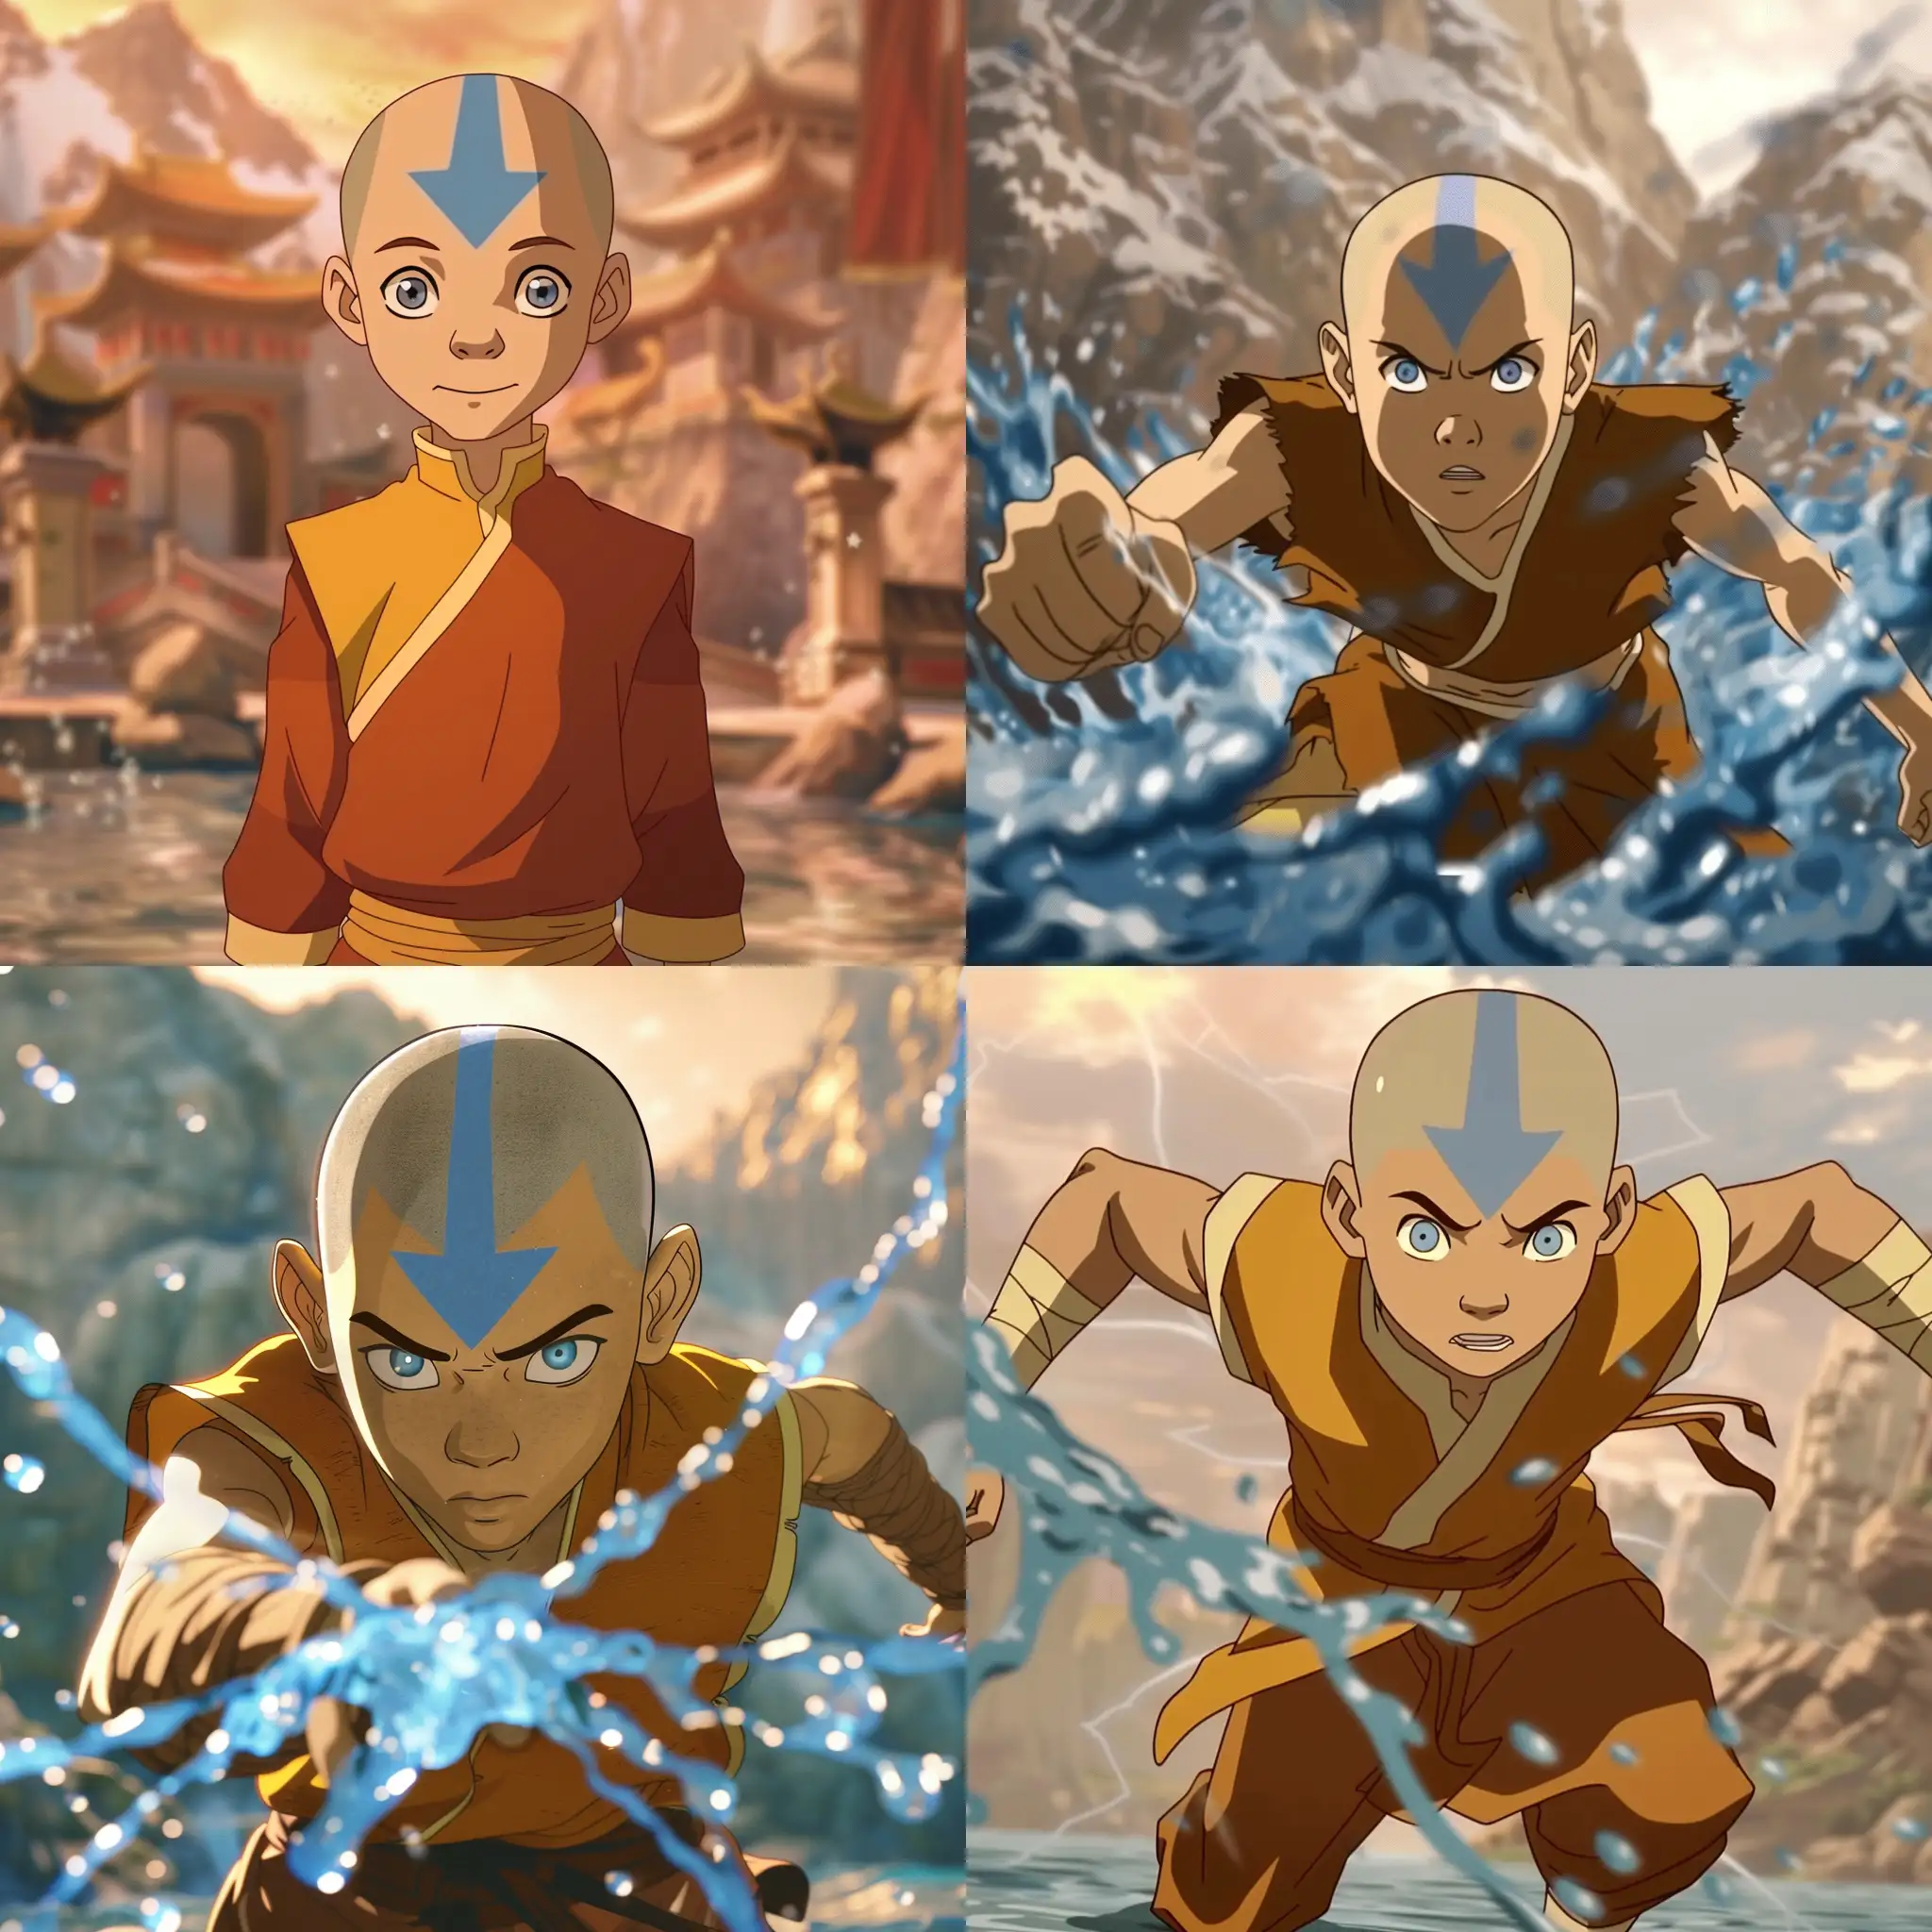 Dynamic-Young-Waterbender-in-Avatar-Animation-Style